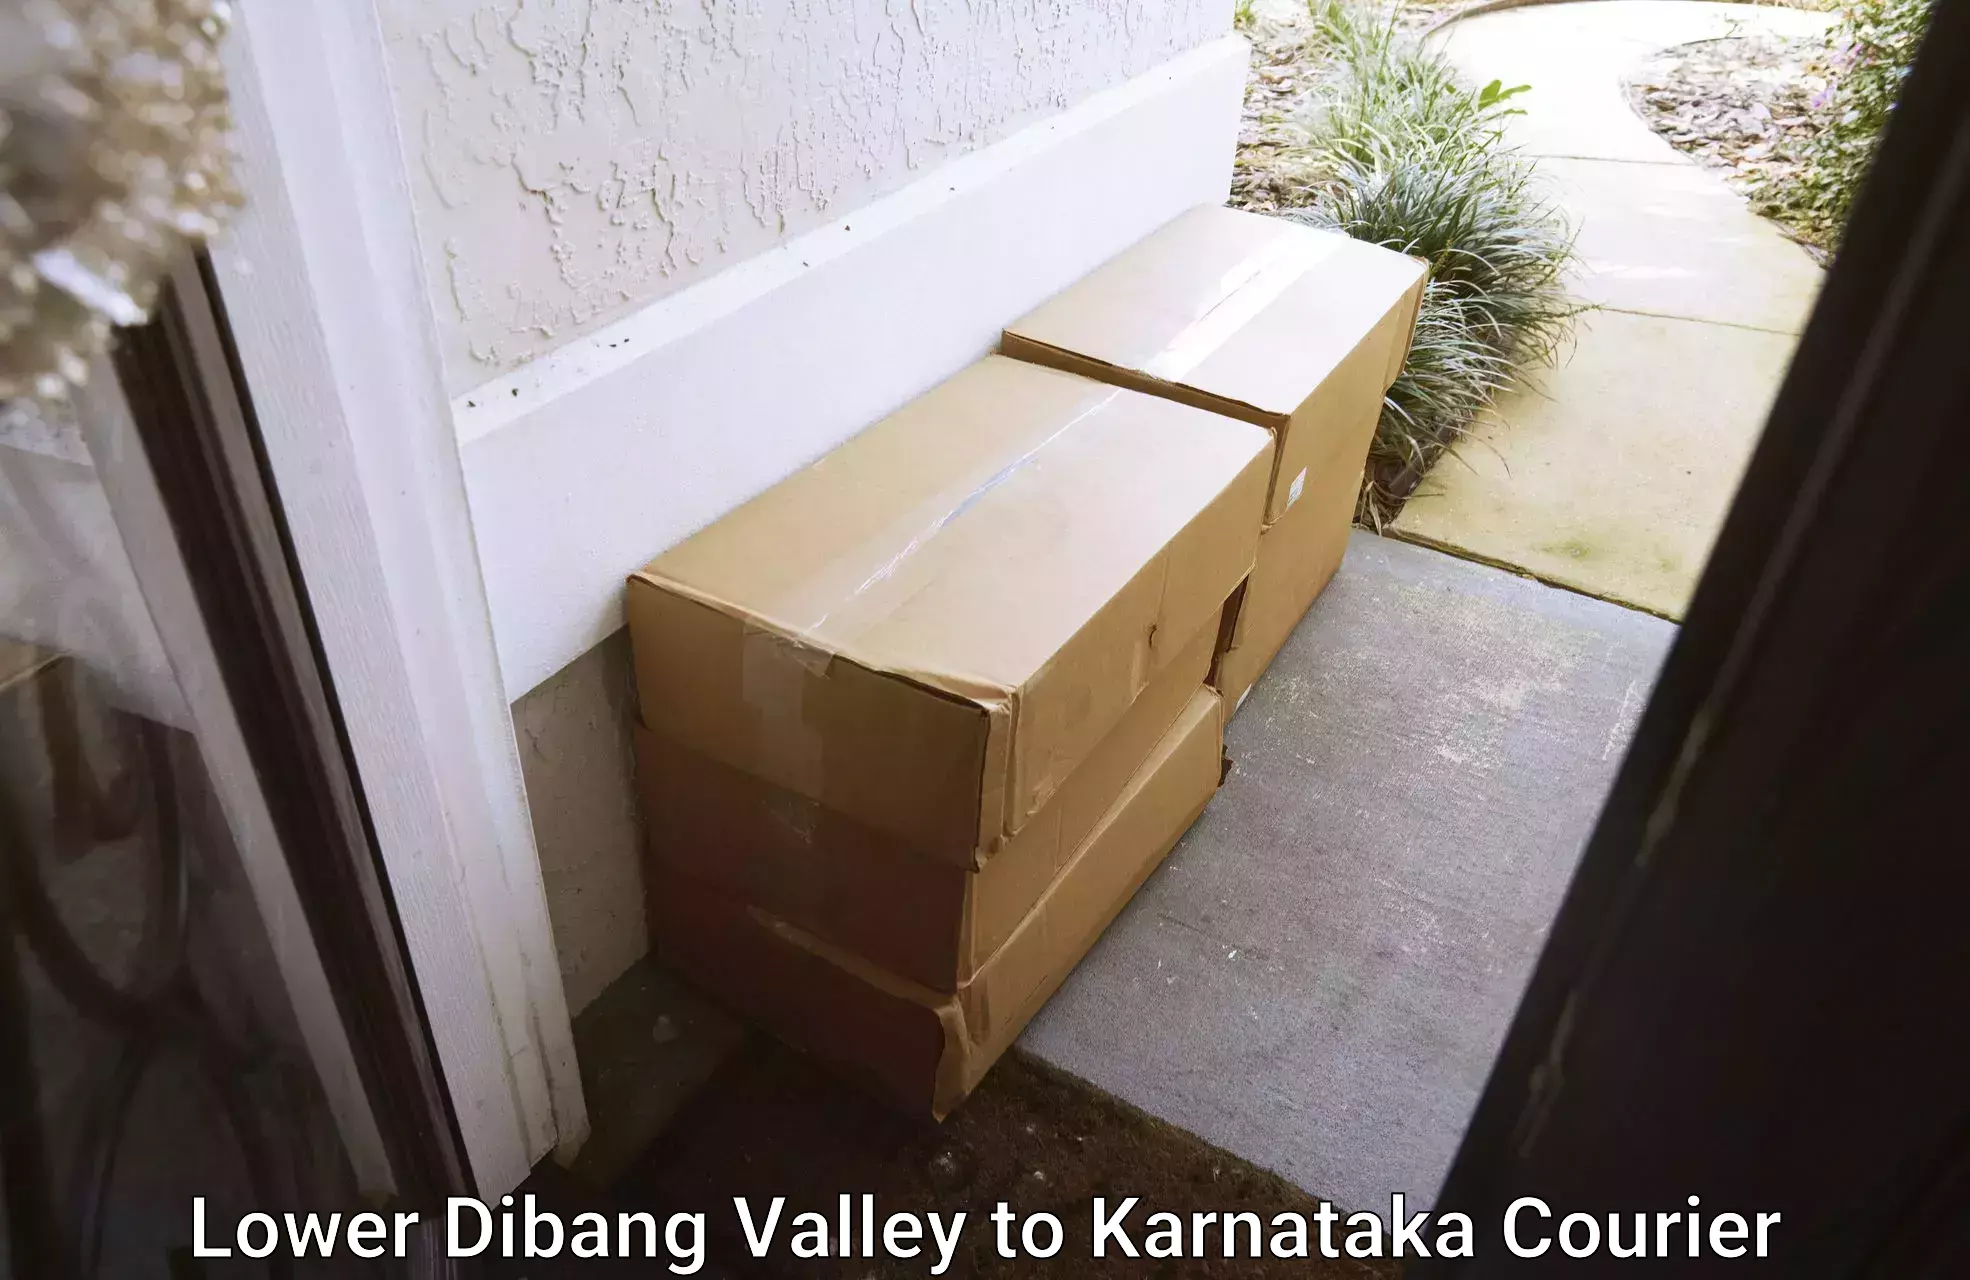 High-speed delivery in Lower Dibang Valley to Karnataka